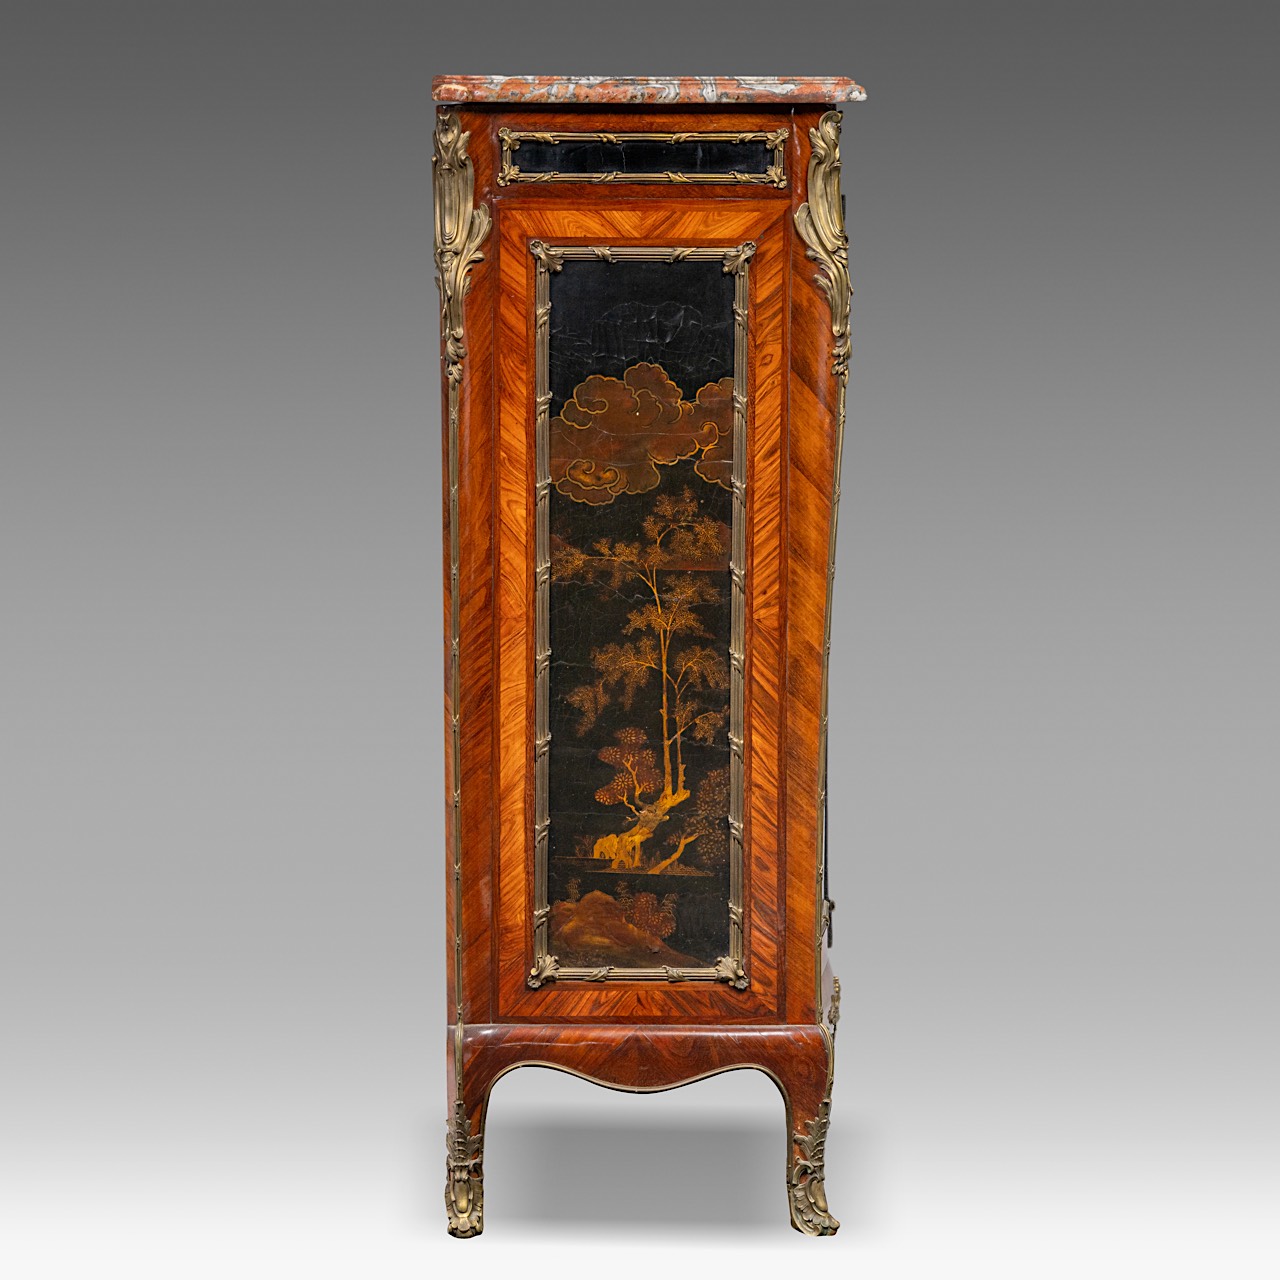 A marble-topped Louis XV (1723-1774) chinoiserie lacquered cabinet, H0125 cm - W 92 cm - D 47,5 cm - Image 6 of 8